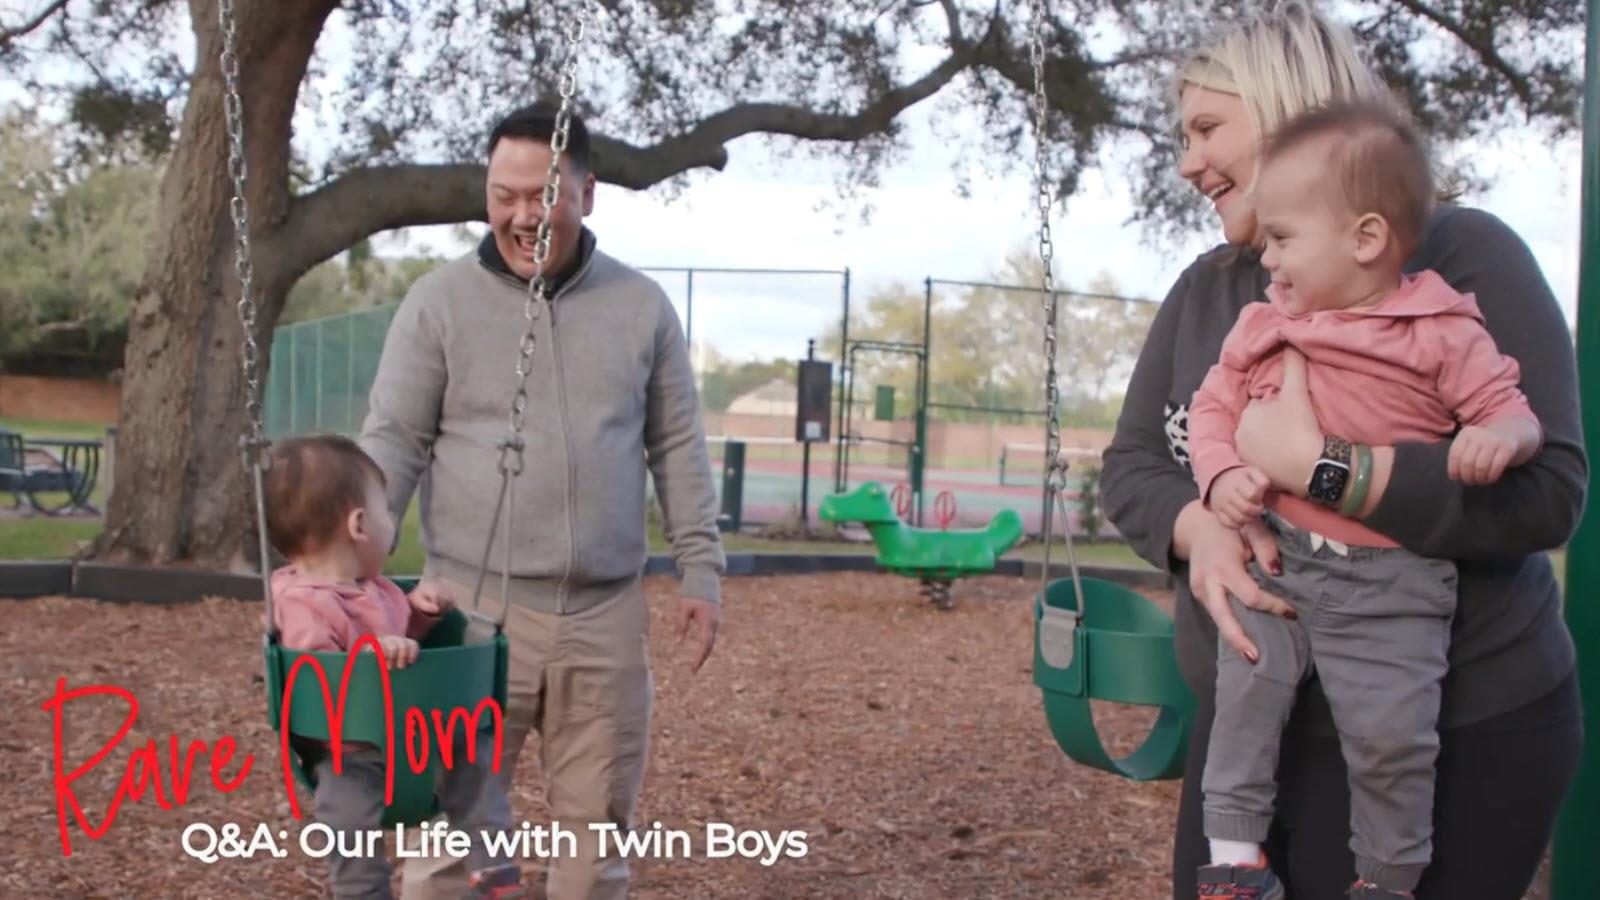 Danielle and her husband Armand play on the swings with their twin sons.